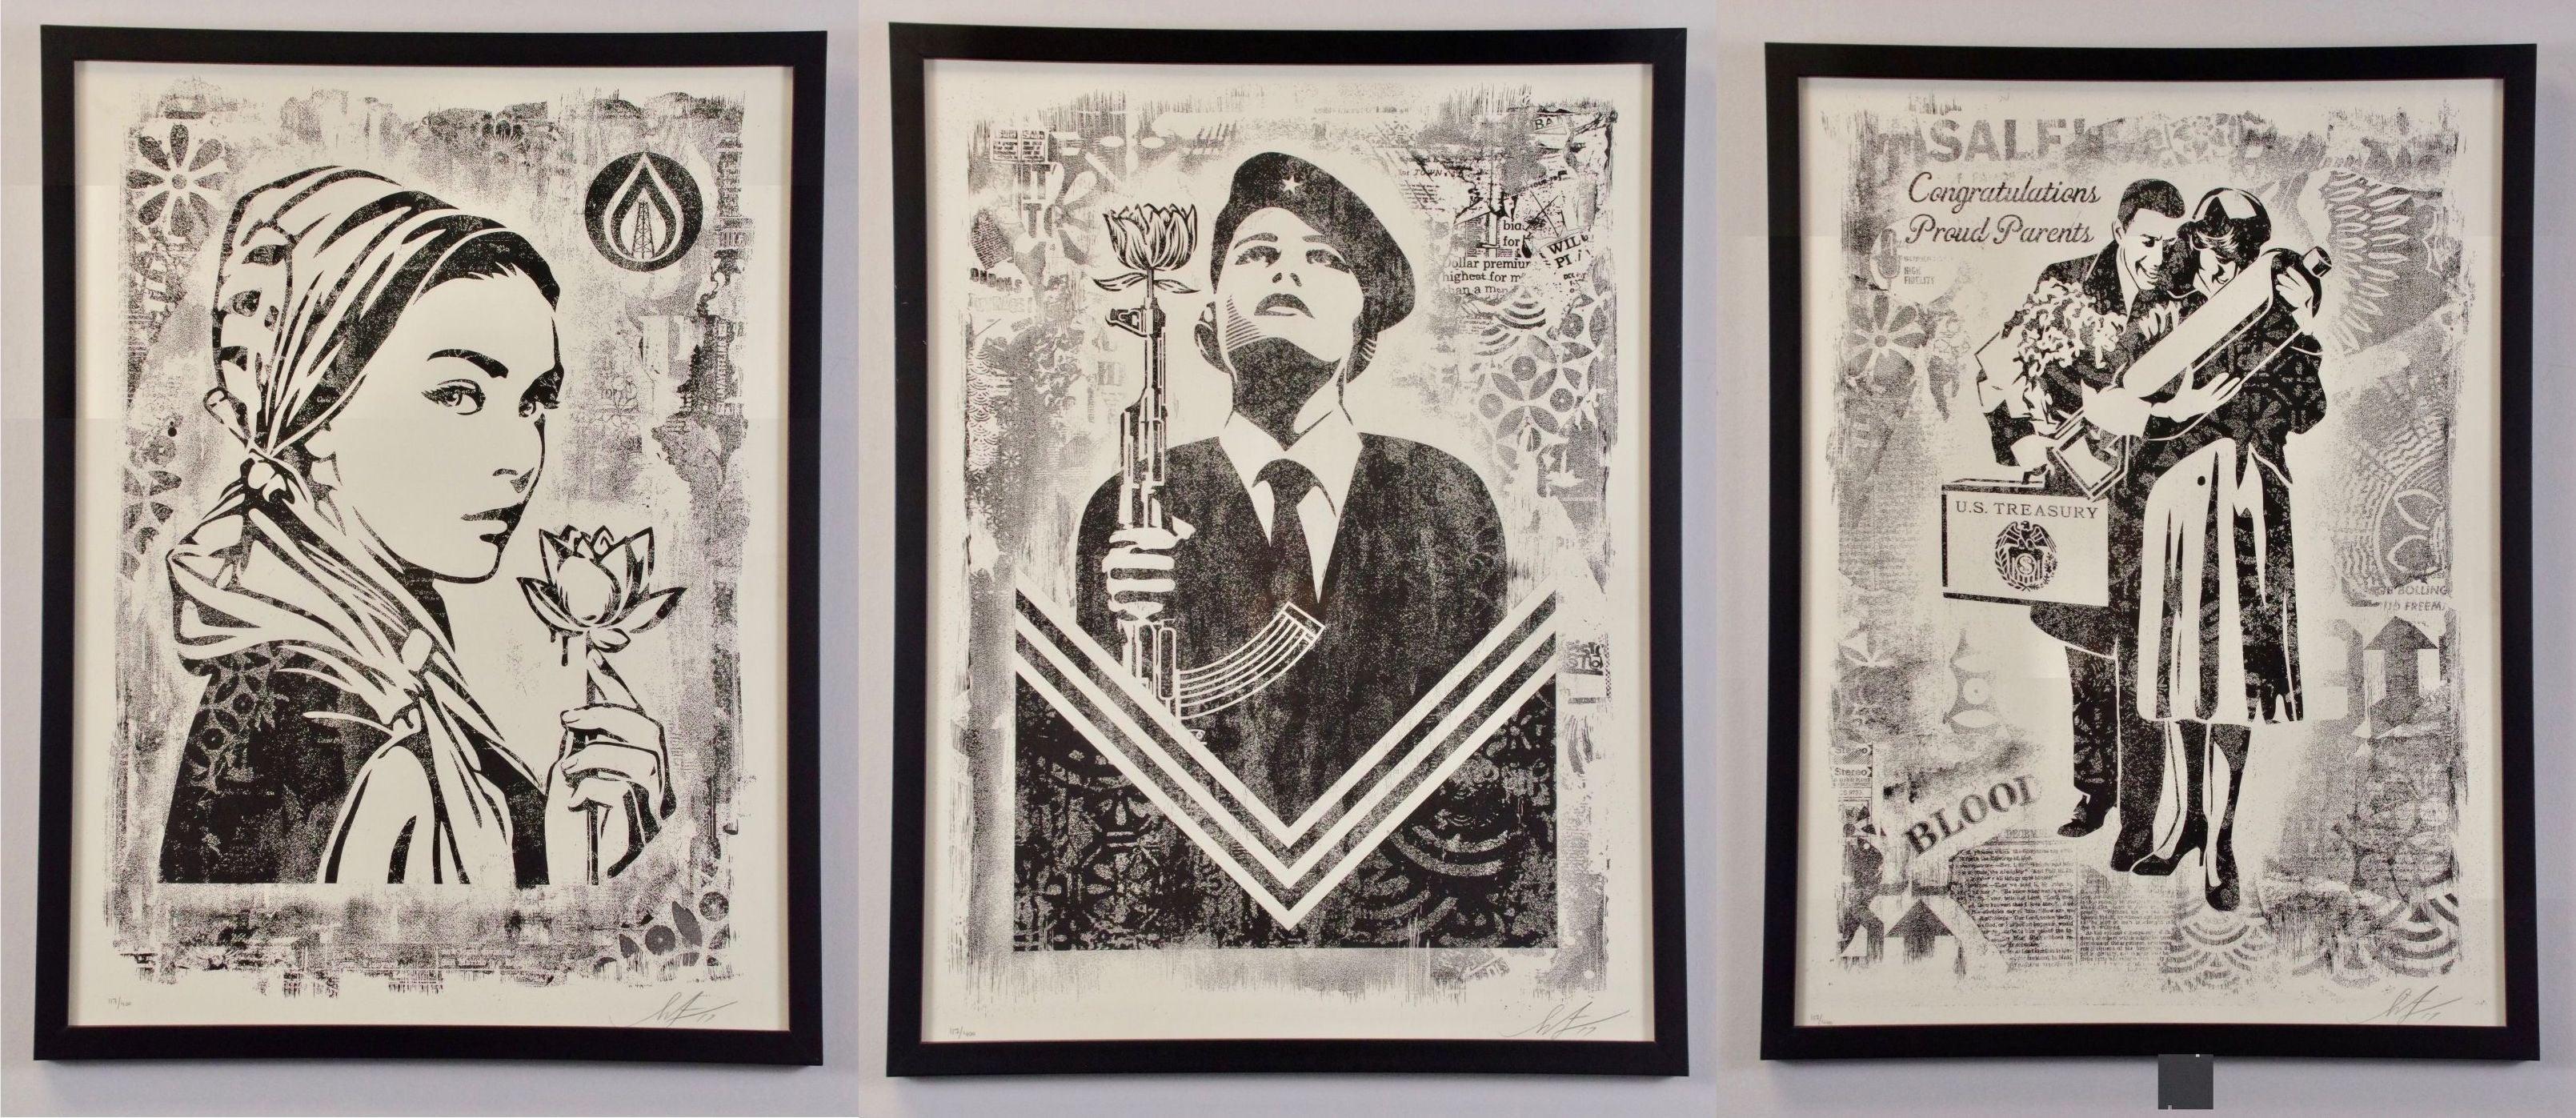 SHEPARD FAIREY Damaged (triptych), 2017 - Signed - Print by Shepard Fairey